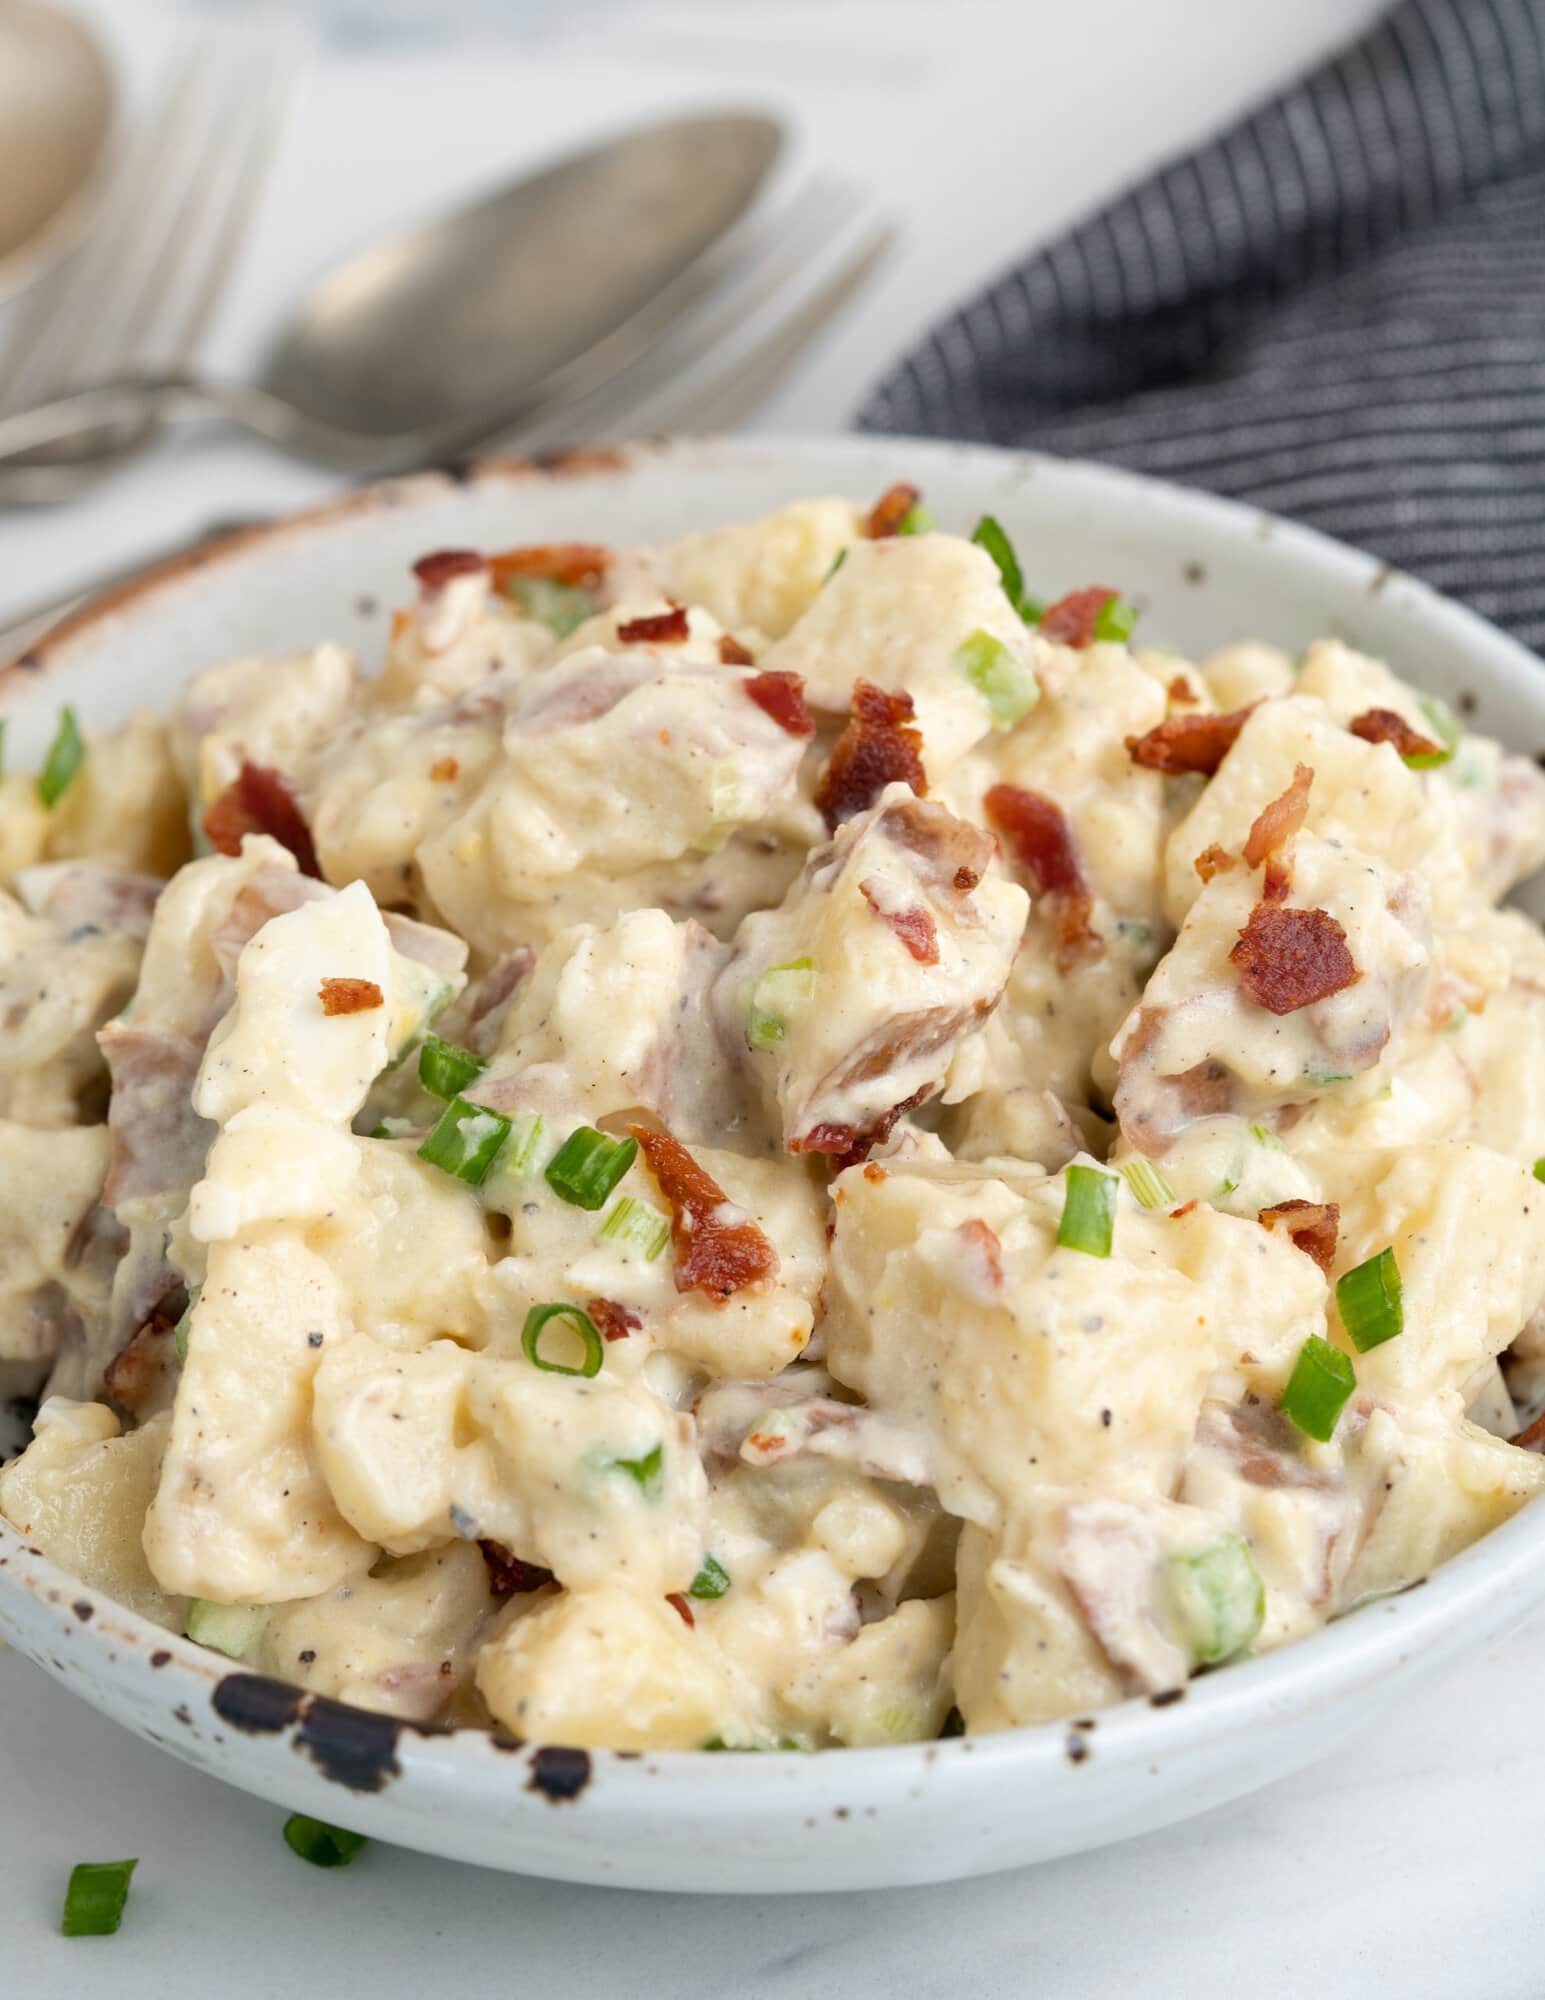 Creamy Potato salad made with red-skinned potatoes, mayo-based dressing, and topped with bacon is one of the best side dishes for BBQs, potlucks etc.